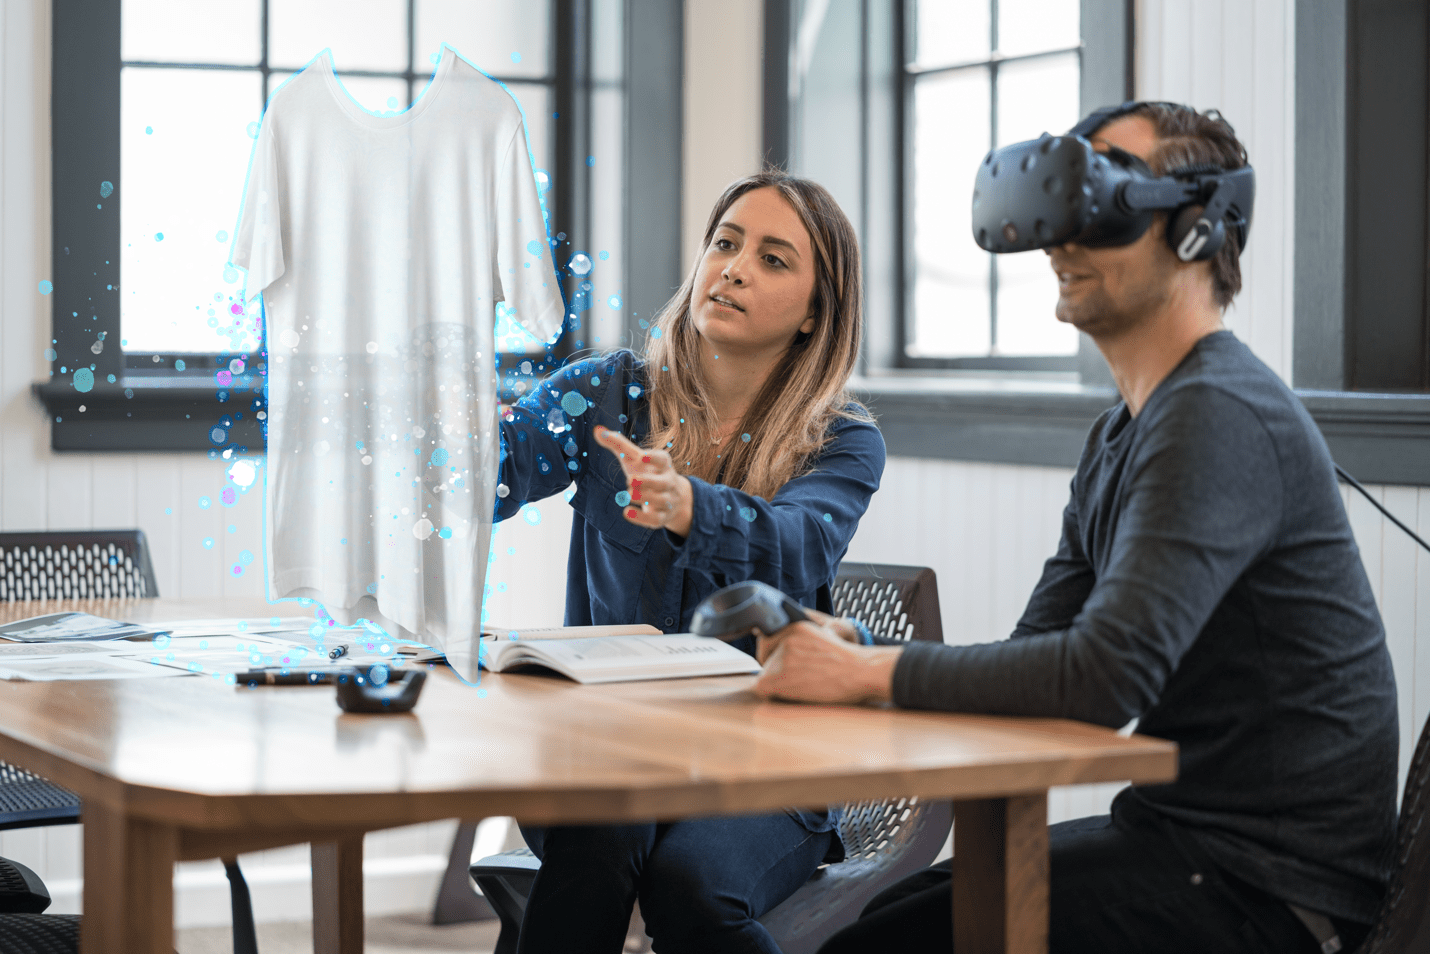 6 Ways XR Improves the Shopping Experience